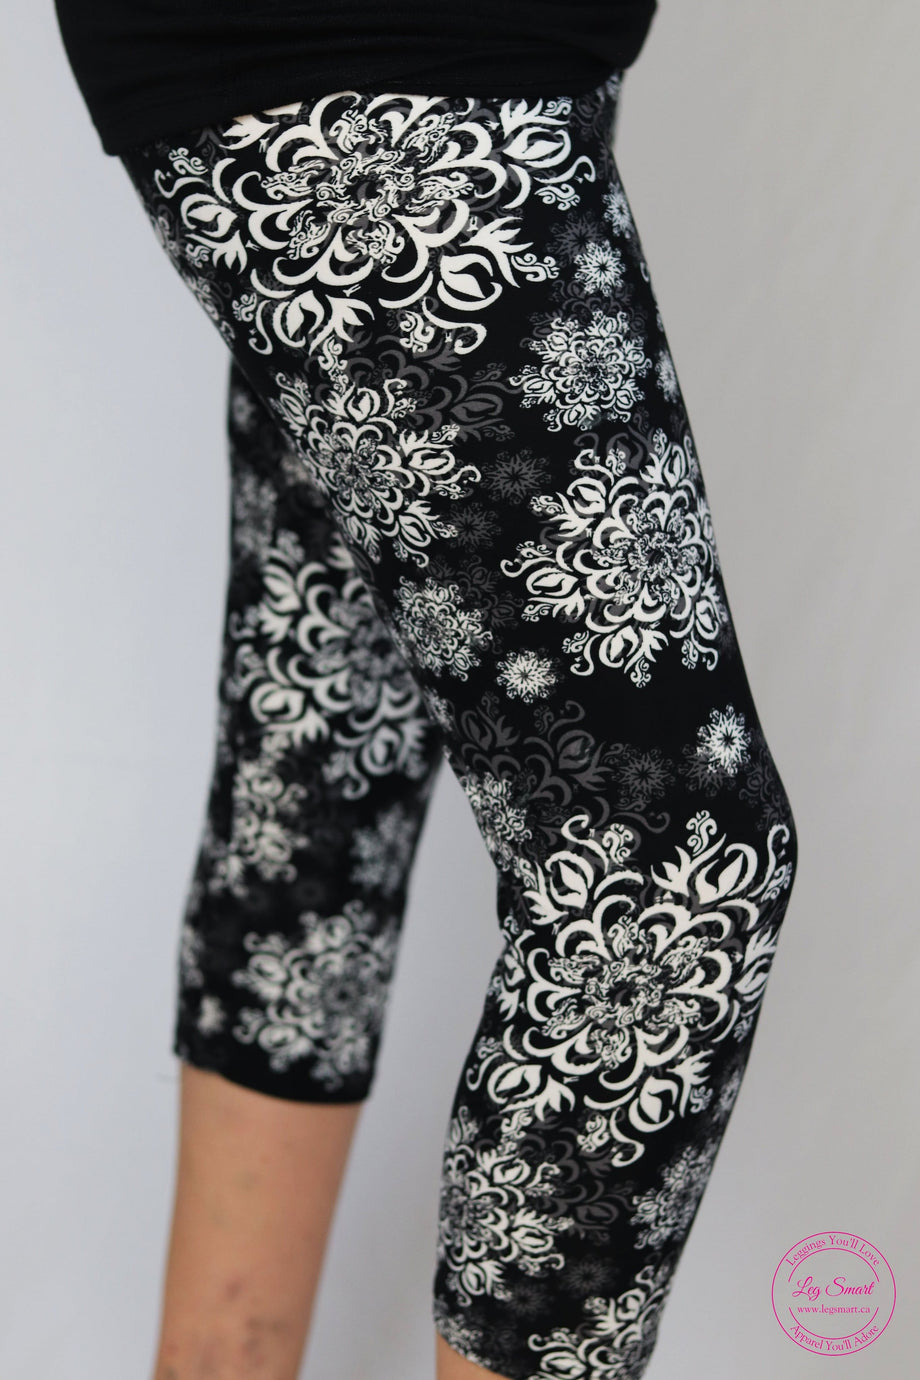 White Floral Lace Capri Length Stretchy Tights One Size